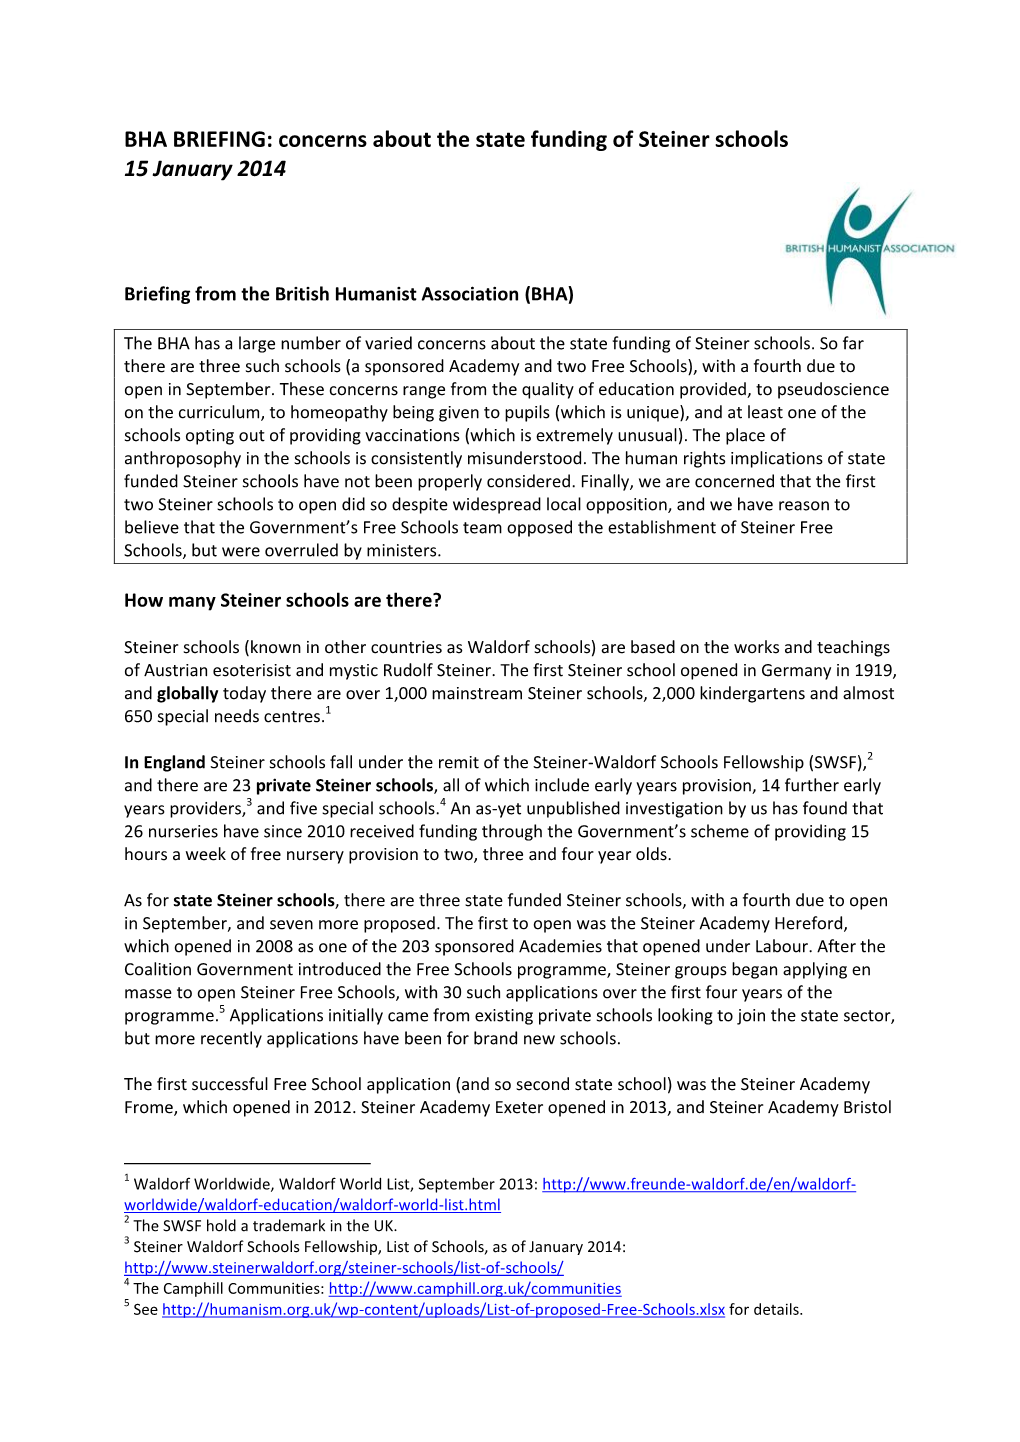 BHA BRIEFING: Concerns About the State Funding of Steiner Schools 15 January 2014